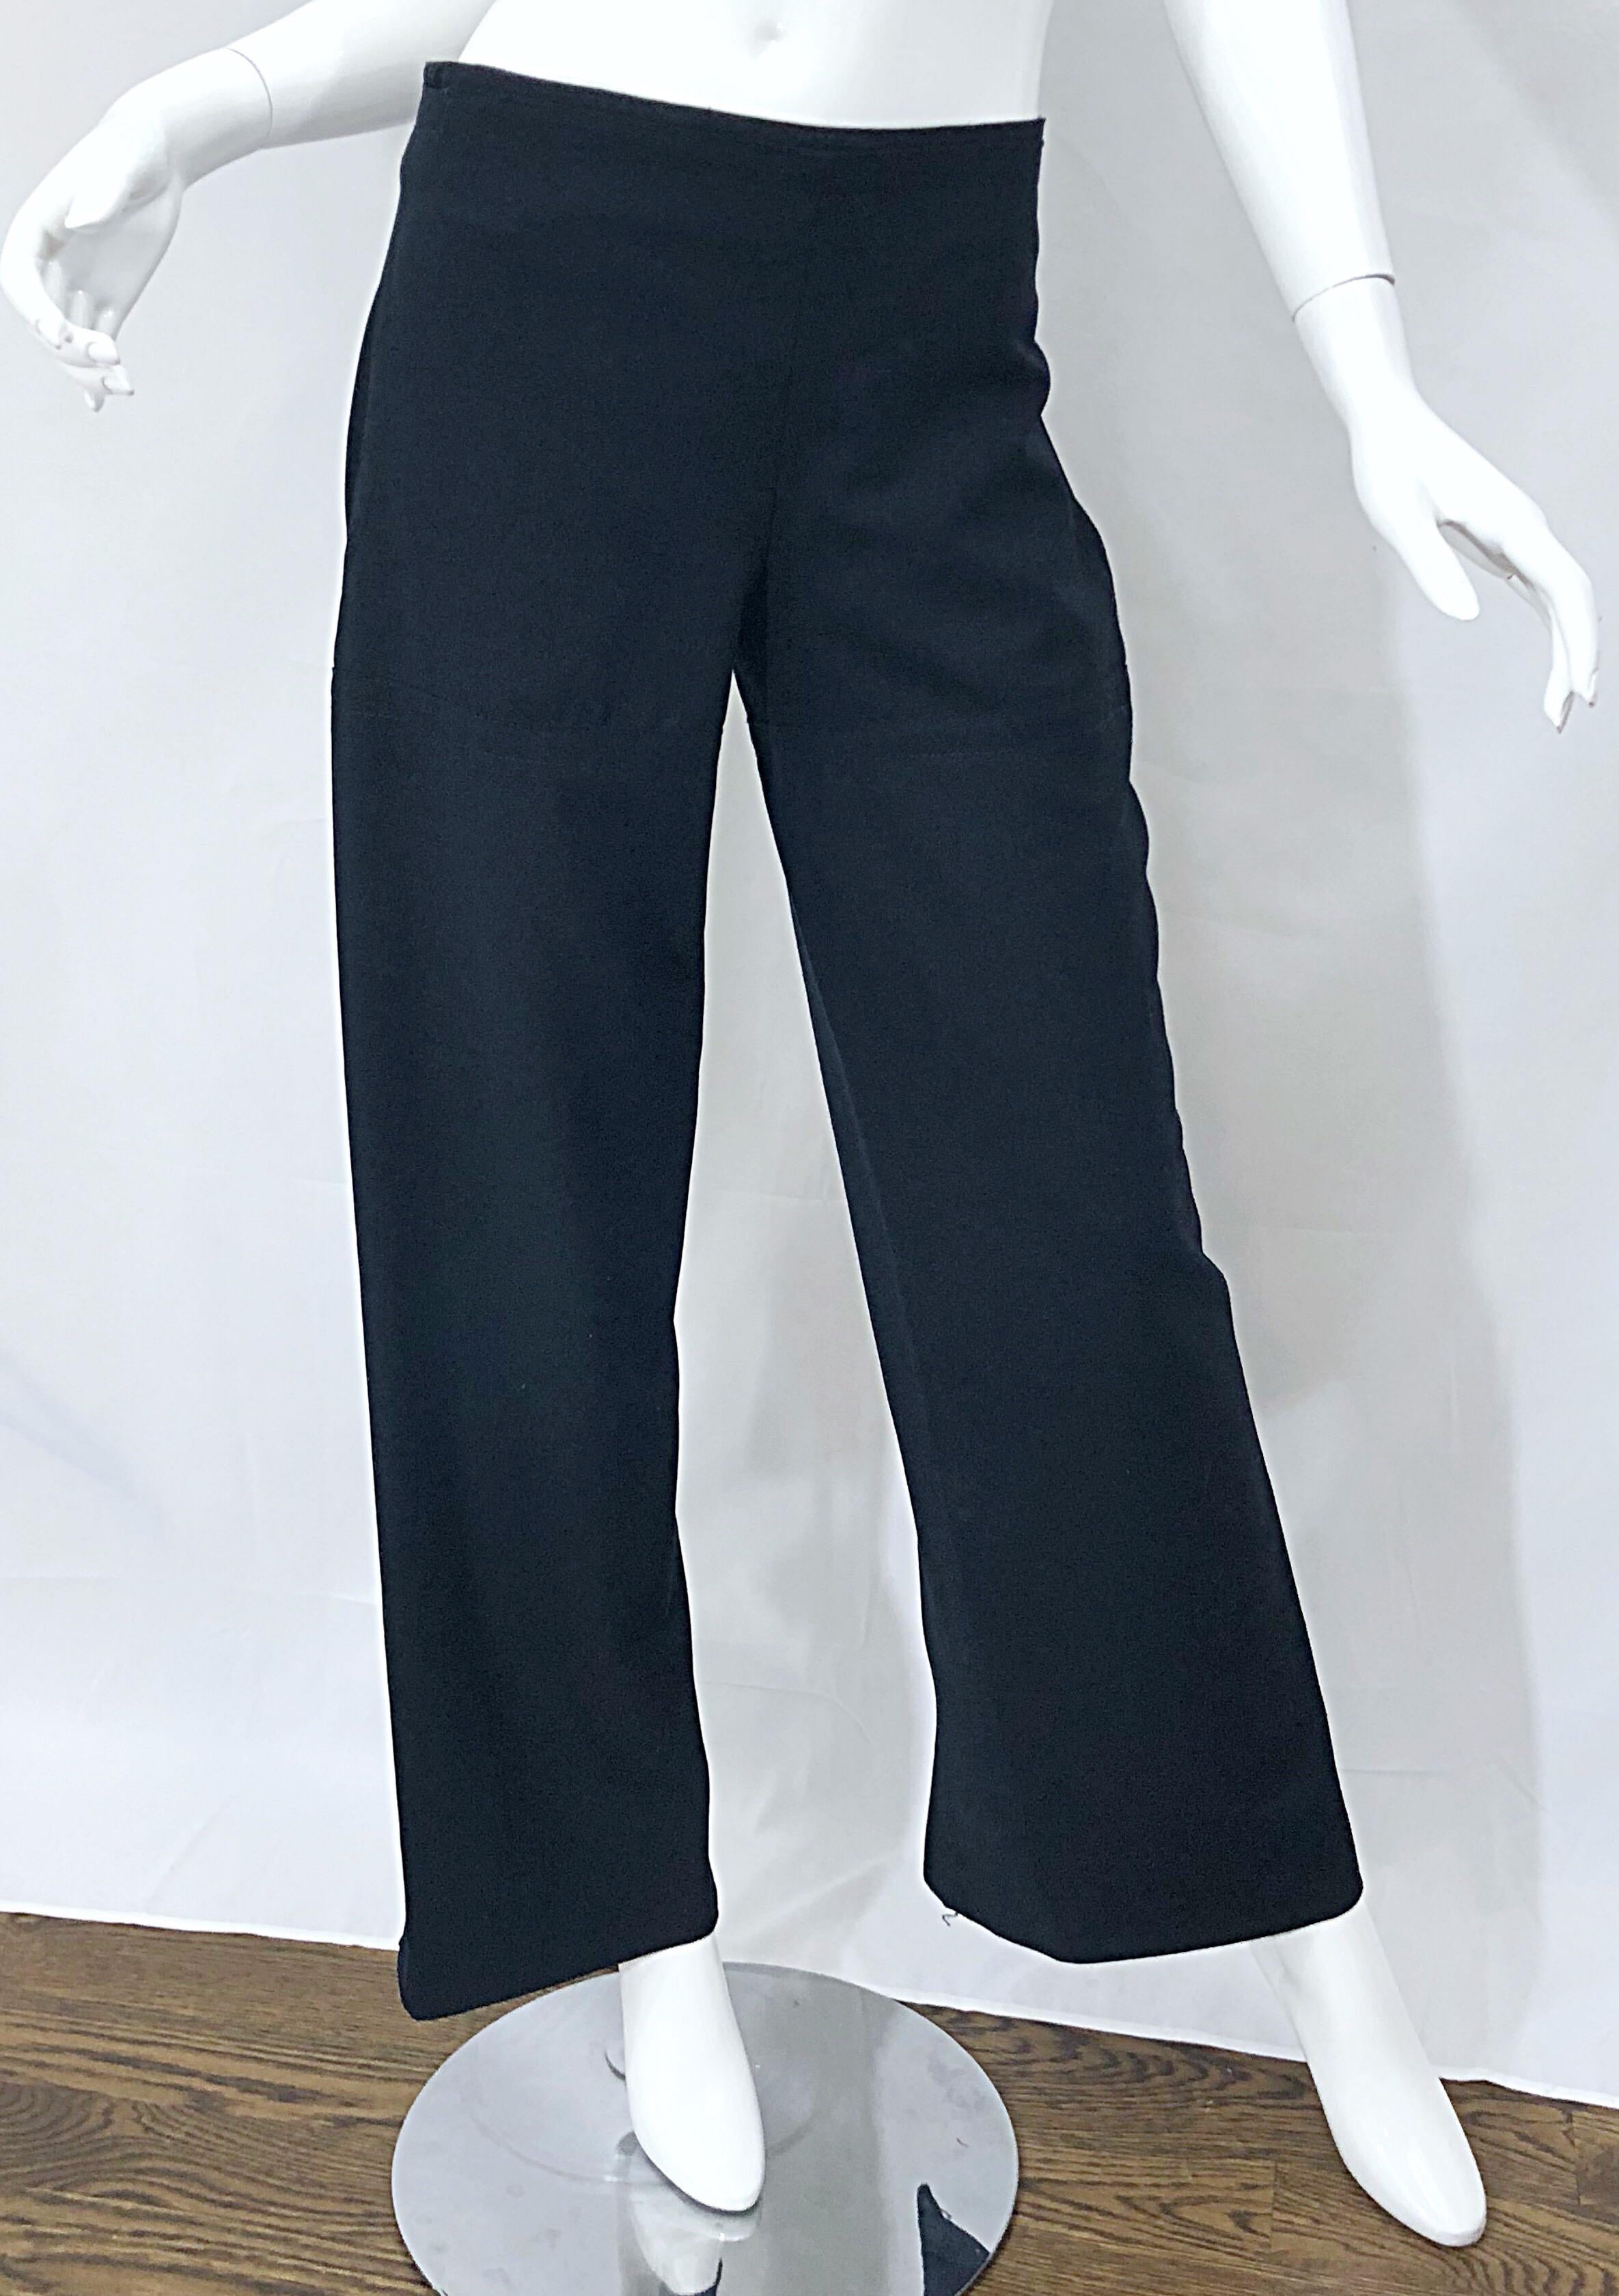 Women's or Men's Dirk Bikkembergs Size 44 Rare Zip Up Black Wool Blend High Waisted Trousers For Sale